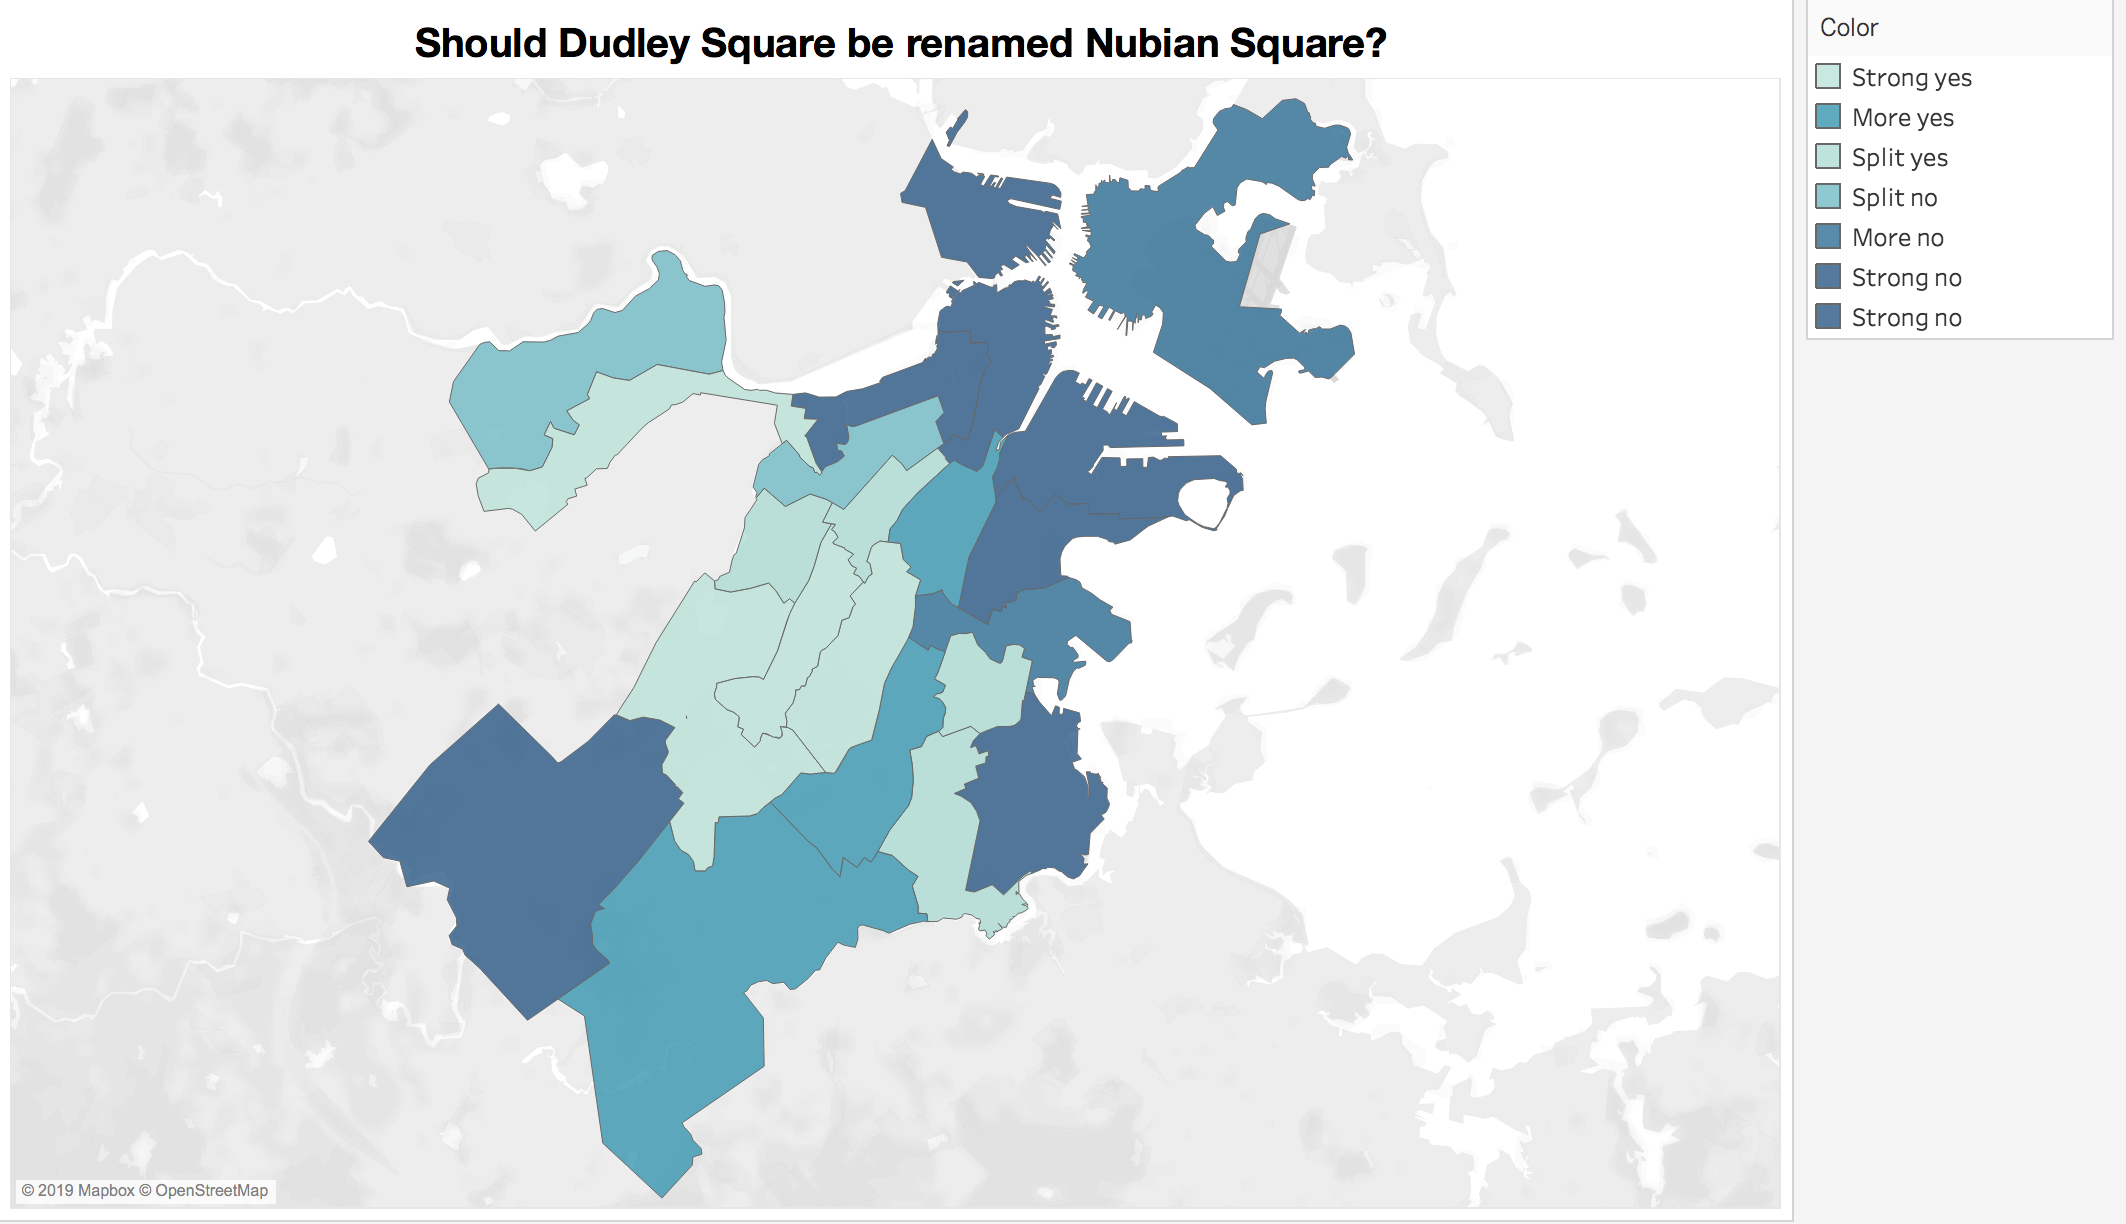 Map, built via Tableau by staff writer Jordan Erb using data from the provided by the Boston Election Department, shows which areas had the greatest levels of support for renaming Dudley Square.